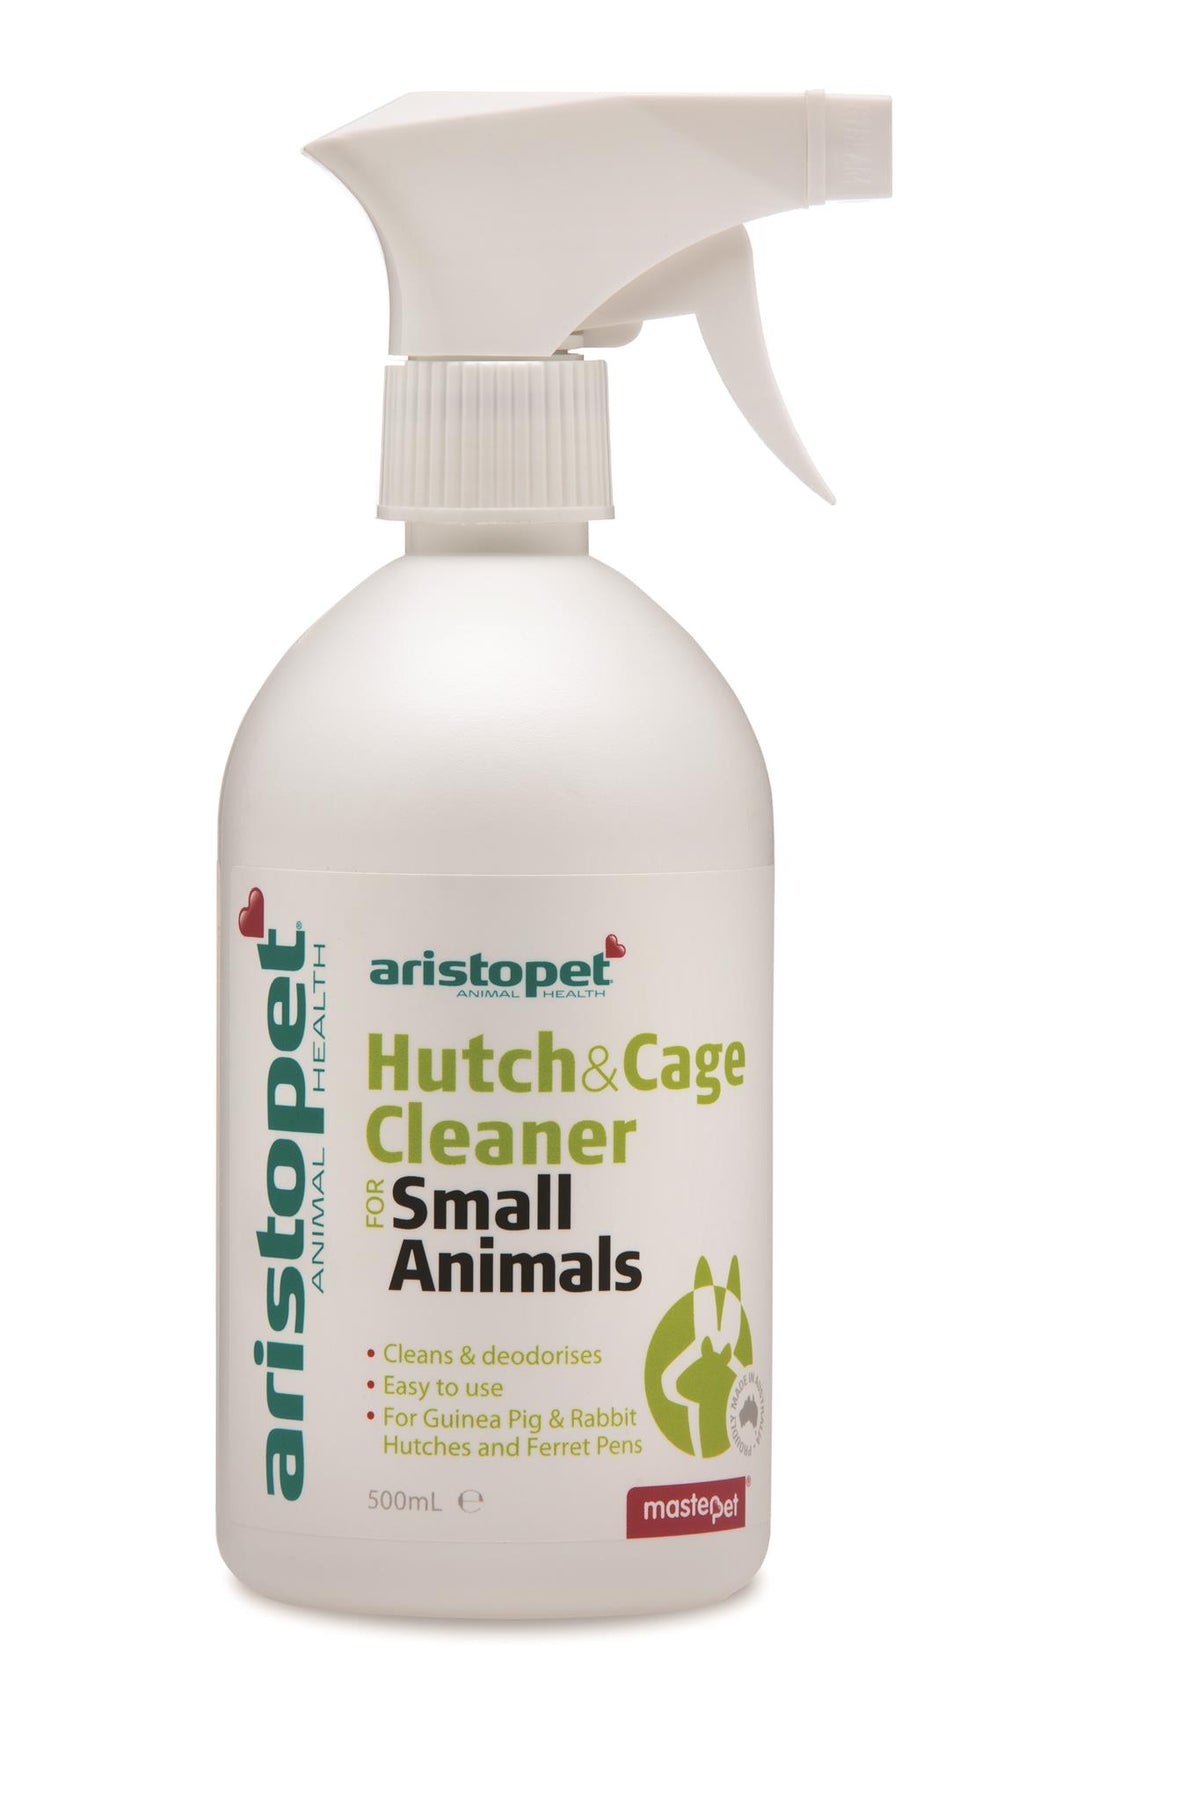 Aristopet Hutch Cage Cleaner